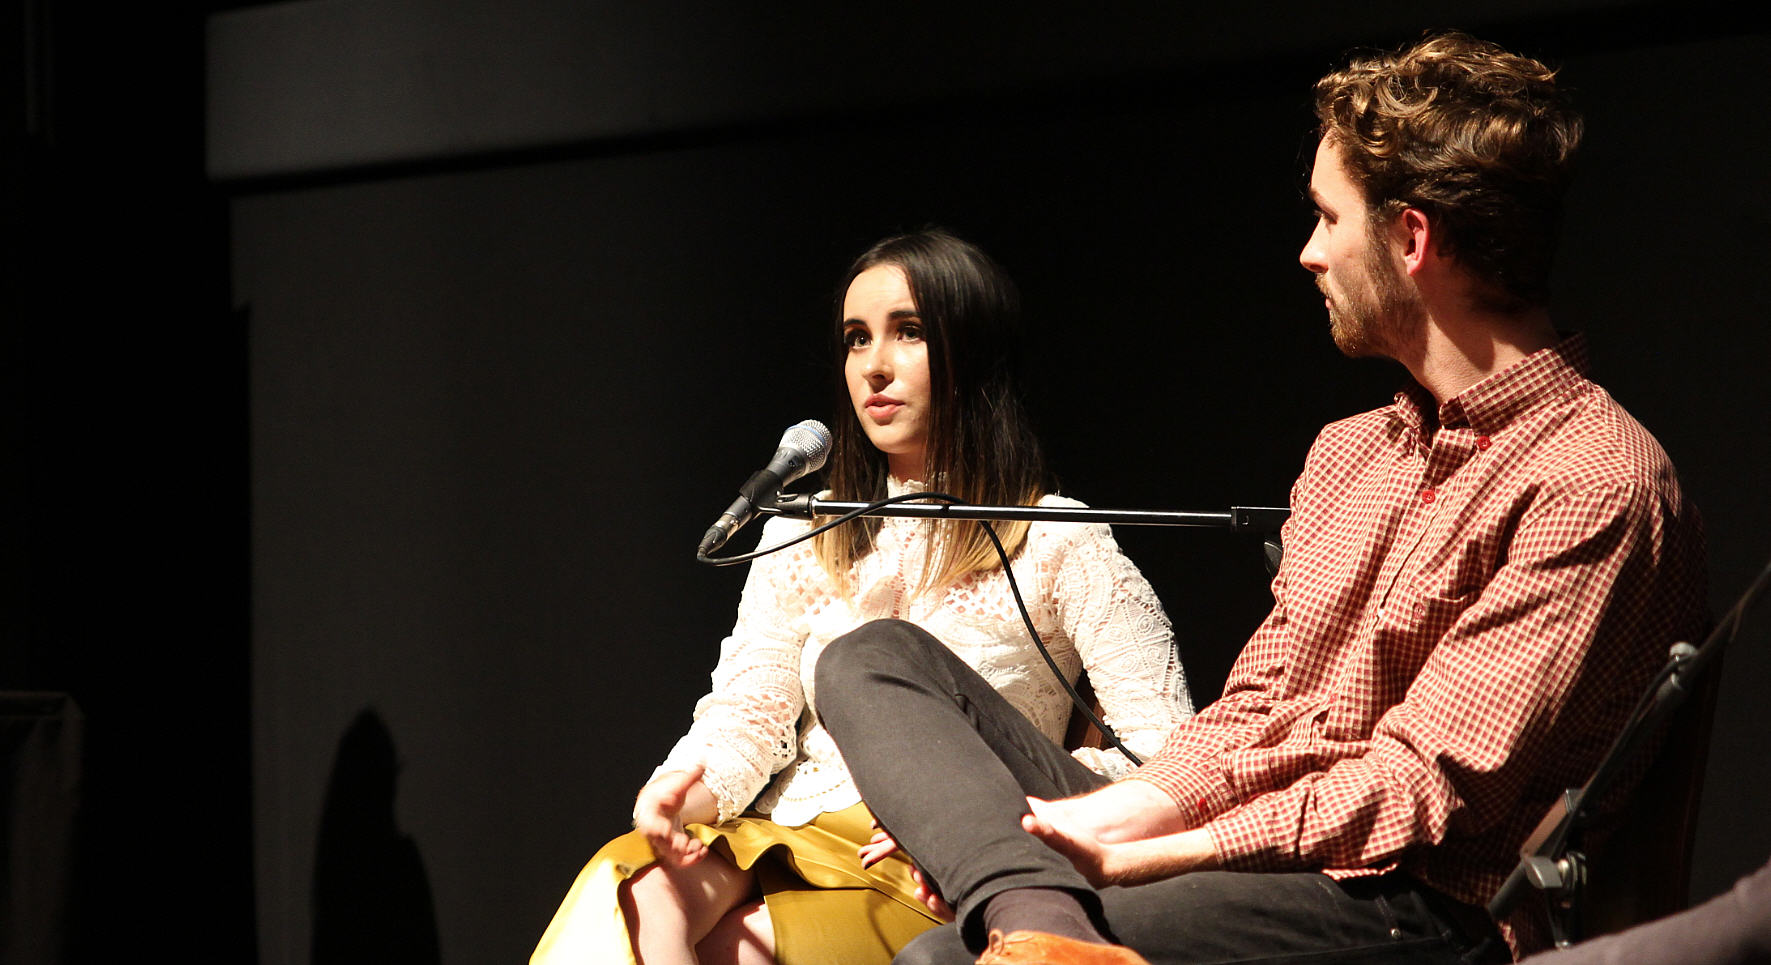 Genevieve speaking at The Human Rights, Arts and Film Festival, where I Am Emmanuel won Best Australian Short Film.